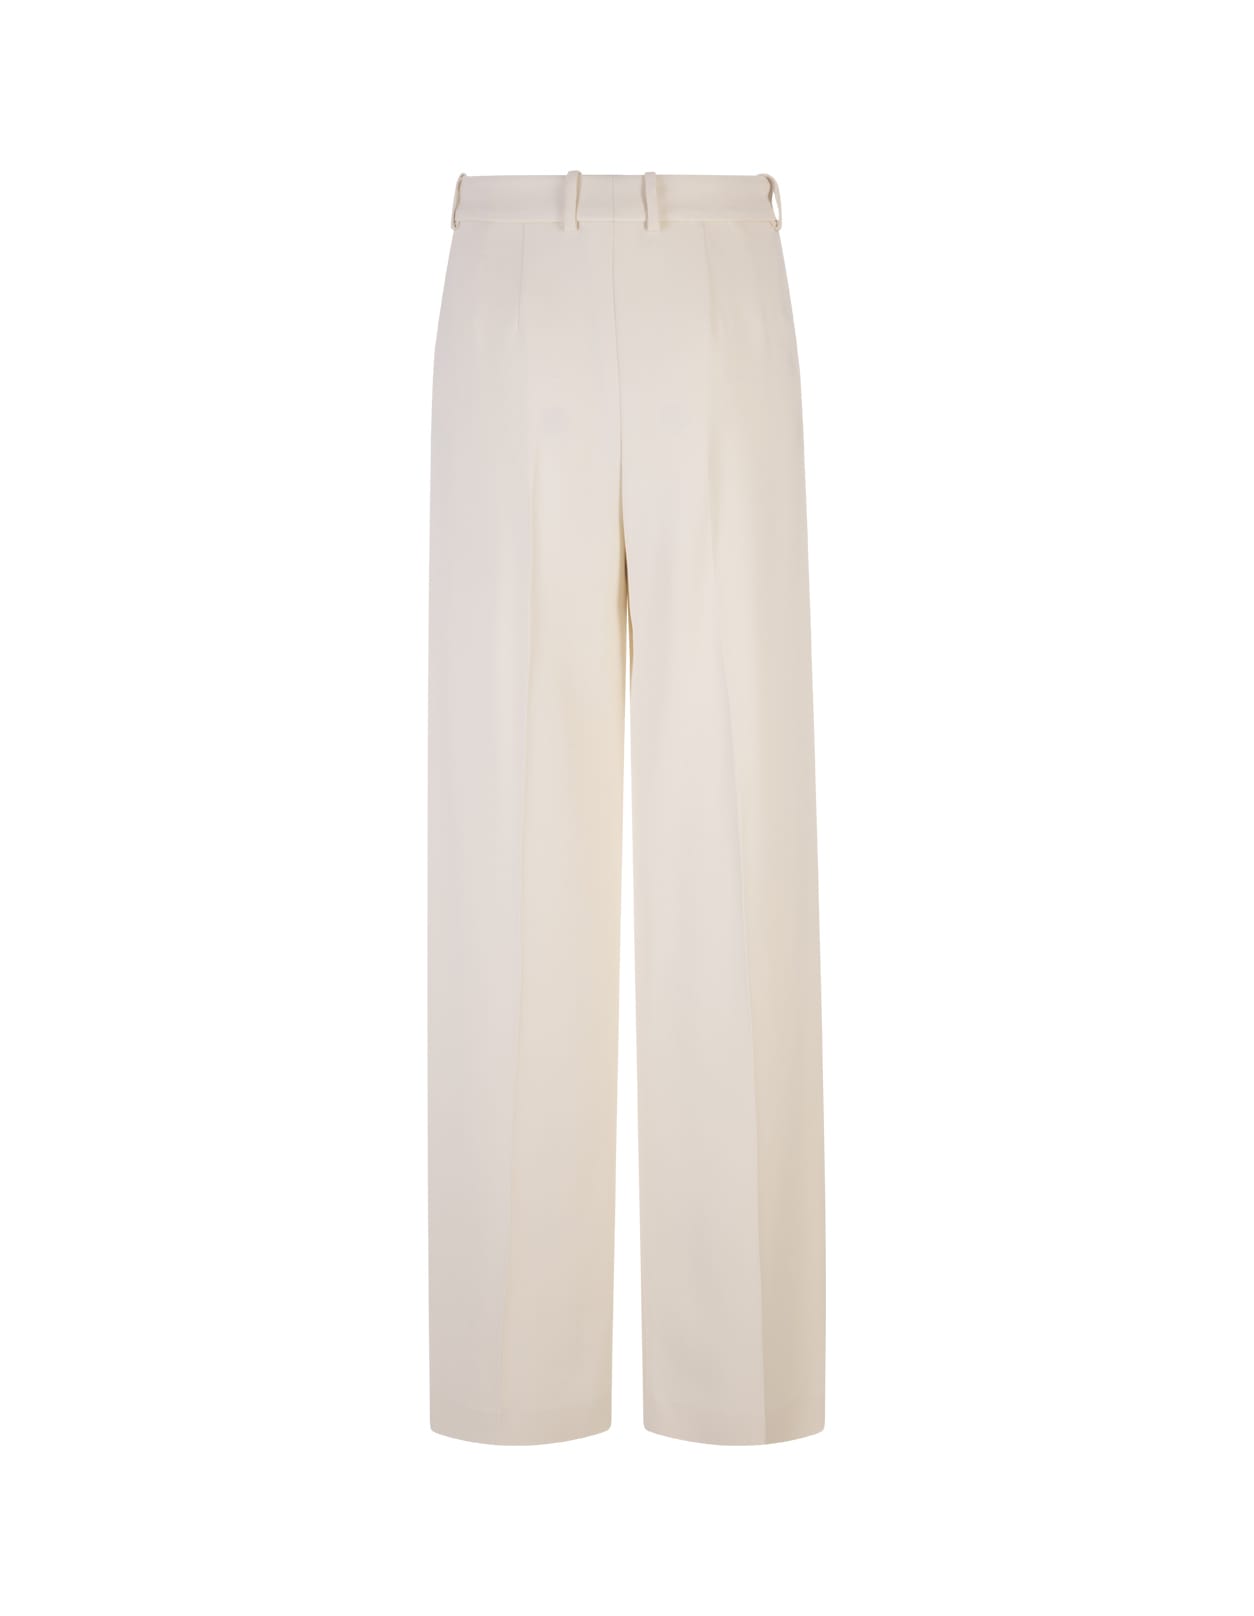 Ermanno Scervino Woman High Waist White Tailored Trousers